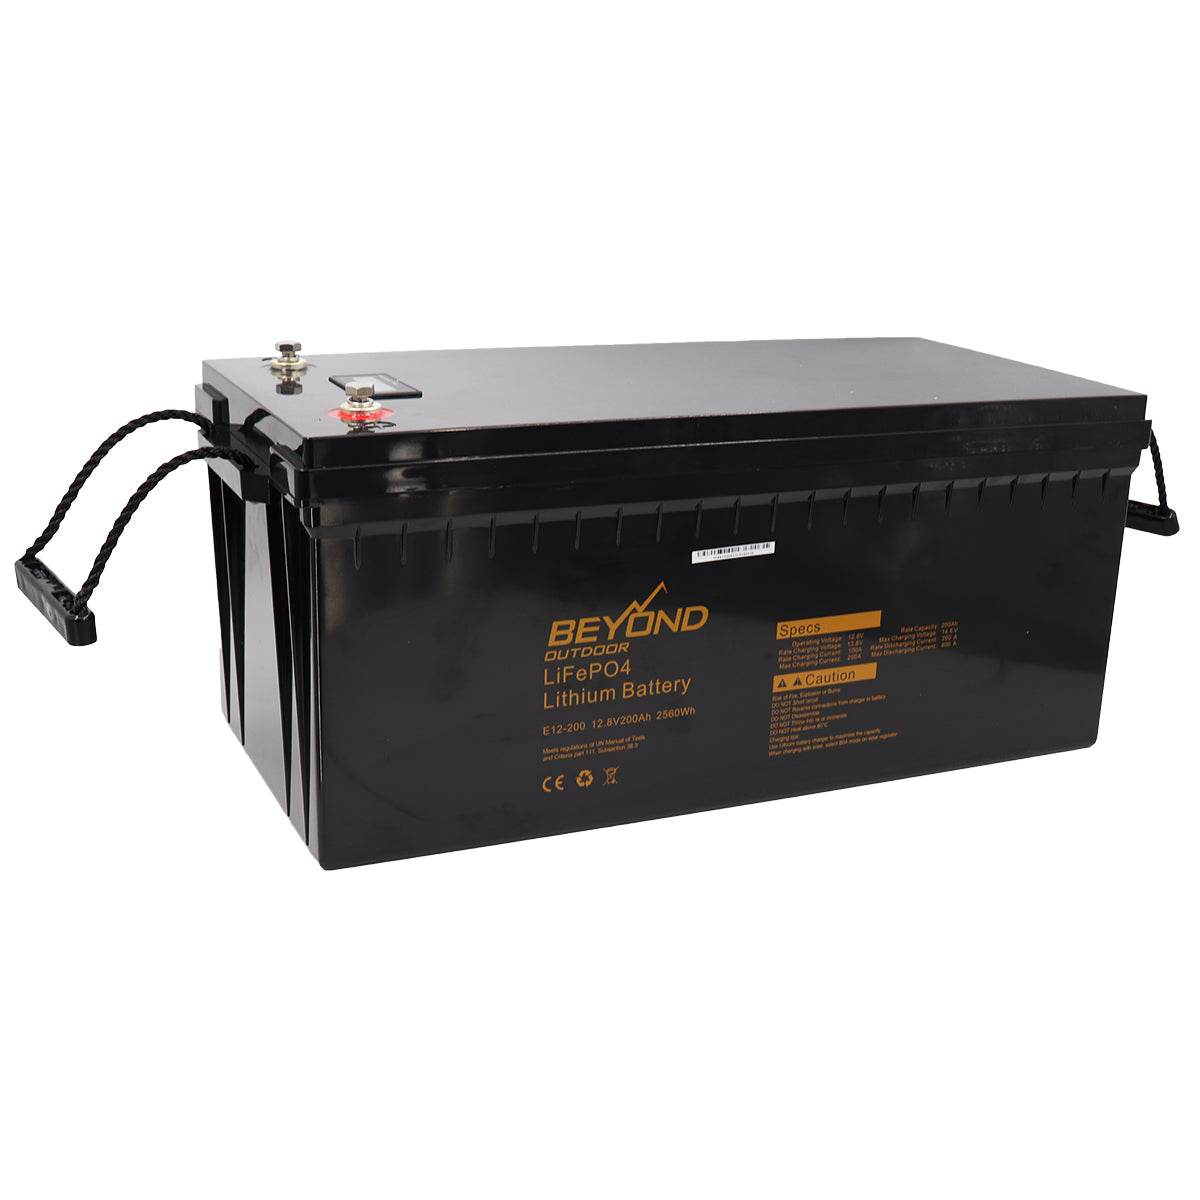 12V 200AH Lithium Battery LifePO4 Deep Cycle w/ Built-In BMS RV Camping 4WD - Zmart Australia